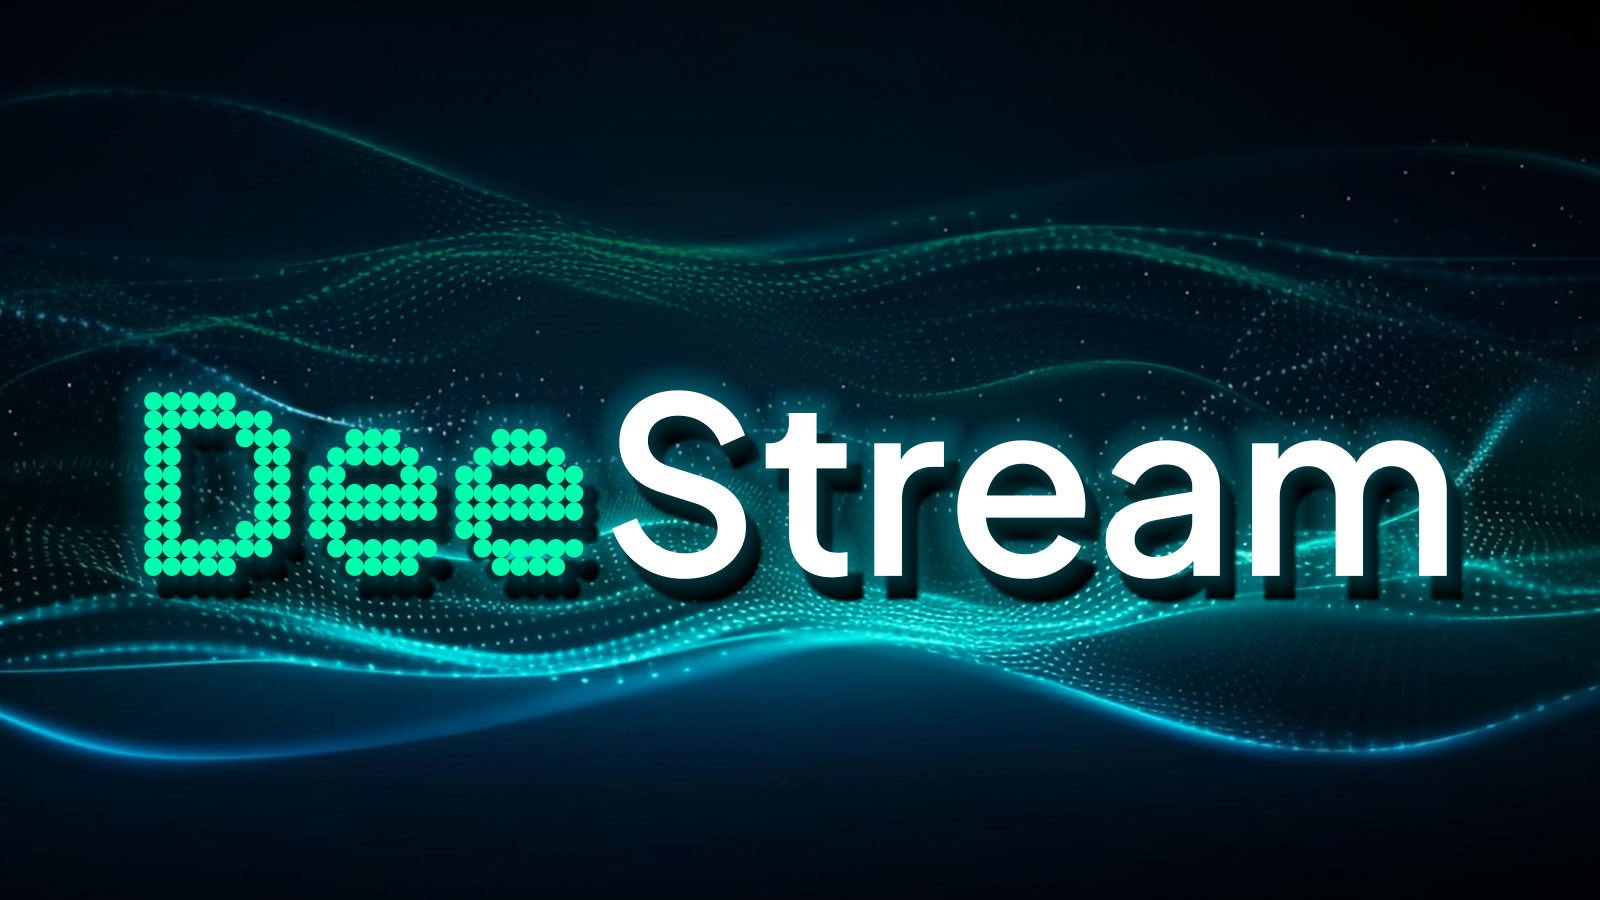 DeeStream (DST) Tokensale Spotlighted by Supporters in March as Cosmos (ATOM), Toncoin (TON) Trading Volumes Gained Traction